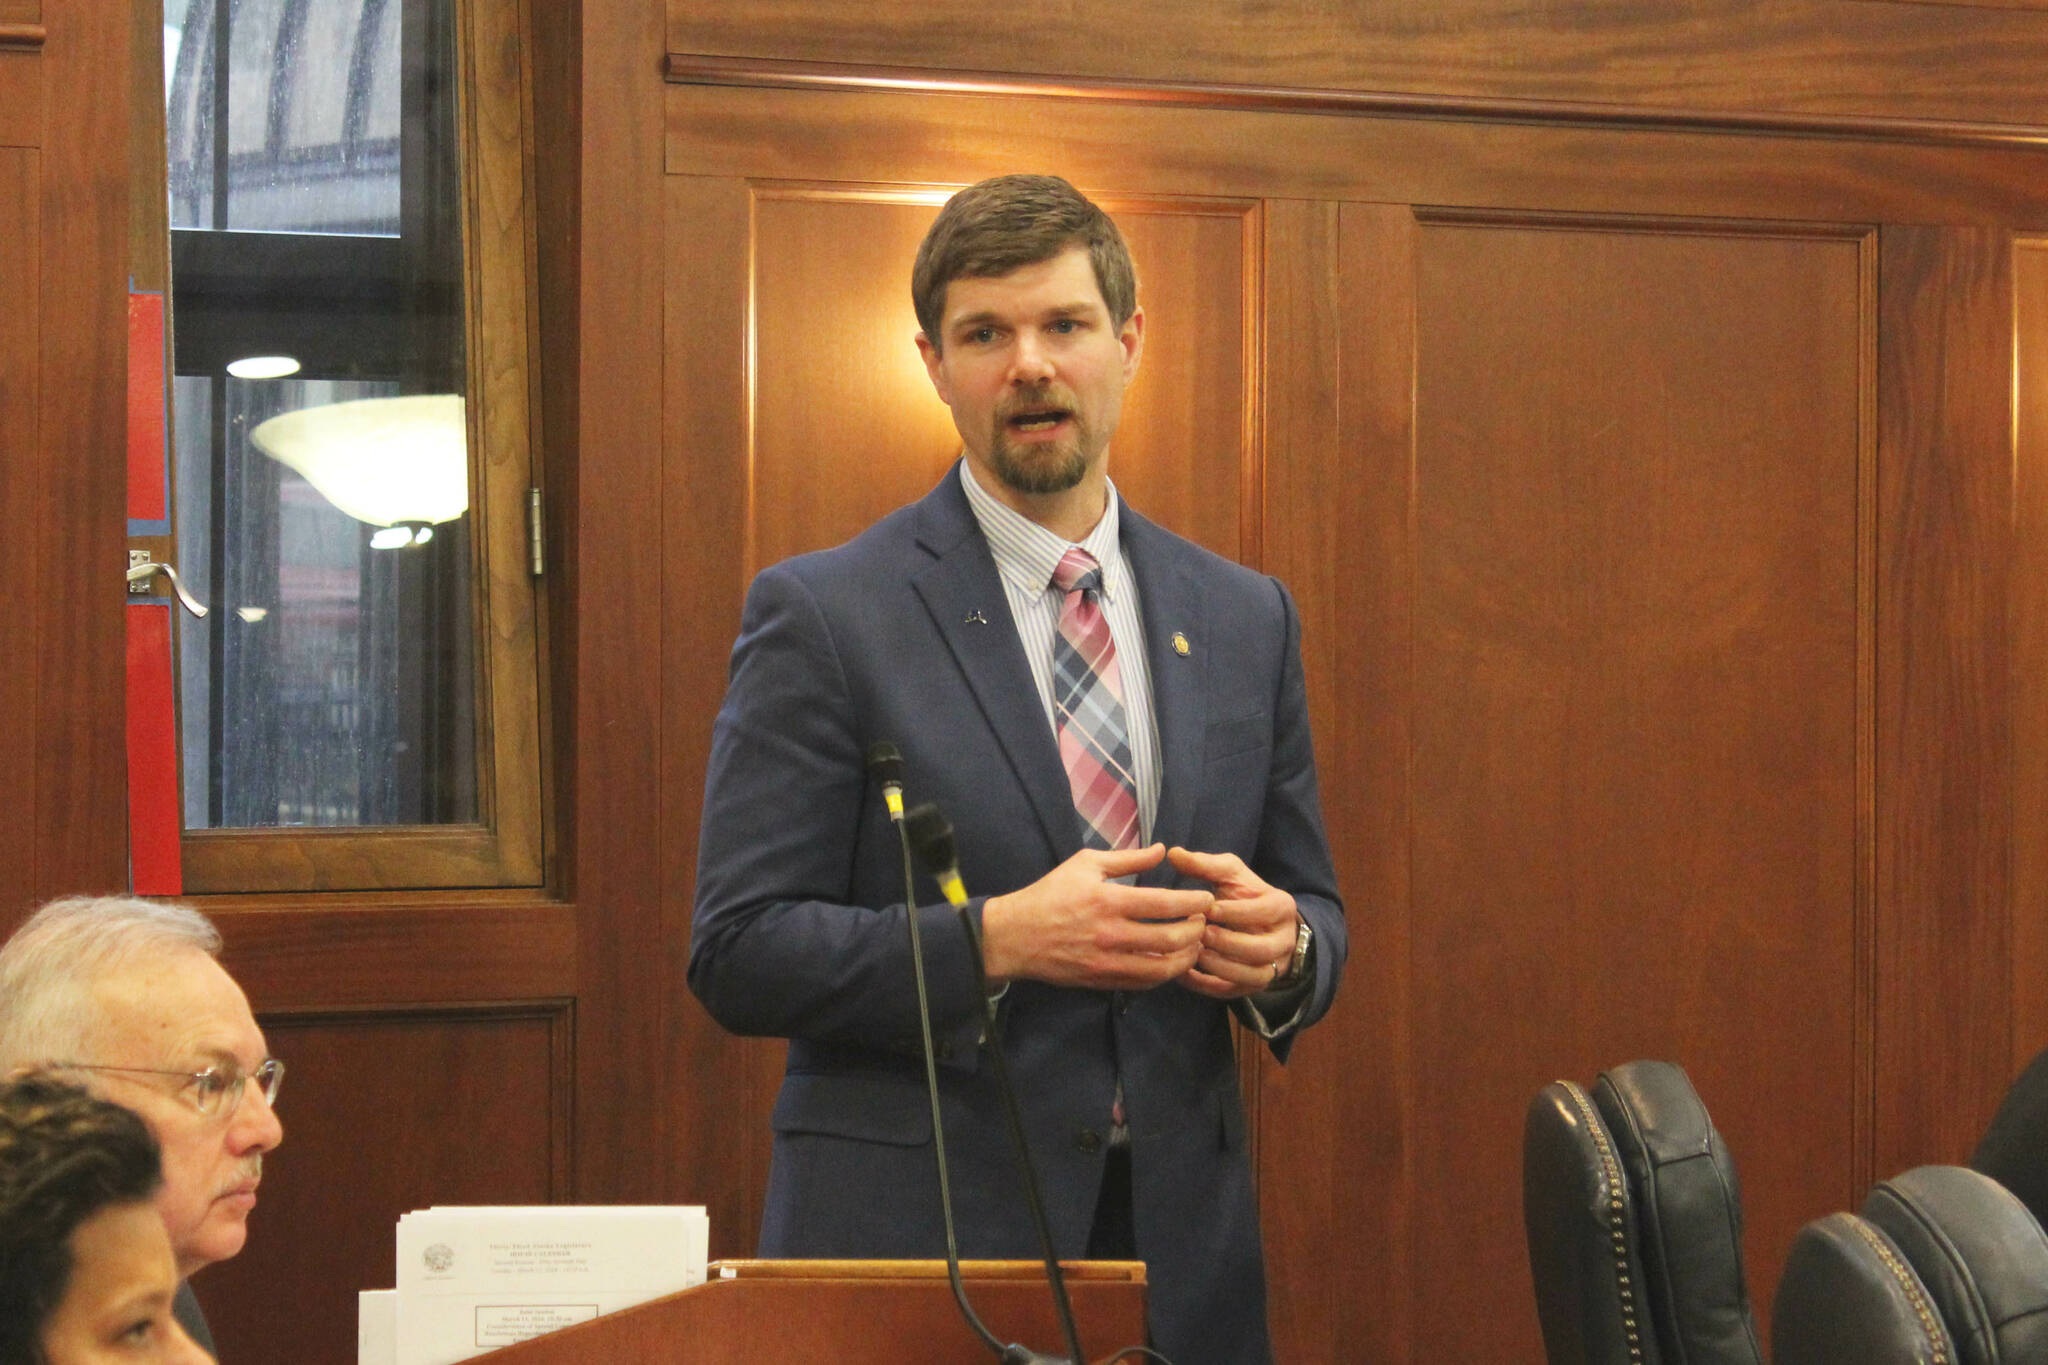 Sen. Jesse Bjorkman, R-Nikiski, speaks in opposition to an executive order that would abolish the Board of Certified Direct-Entry Midwives during a joint legislative session on Tuesday, March 12, 2024 in Juneau, Alaska. (Ashlyn O'Hara/Peninsula Clarion)